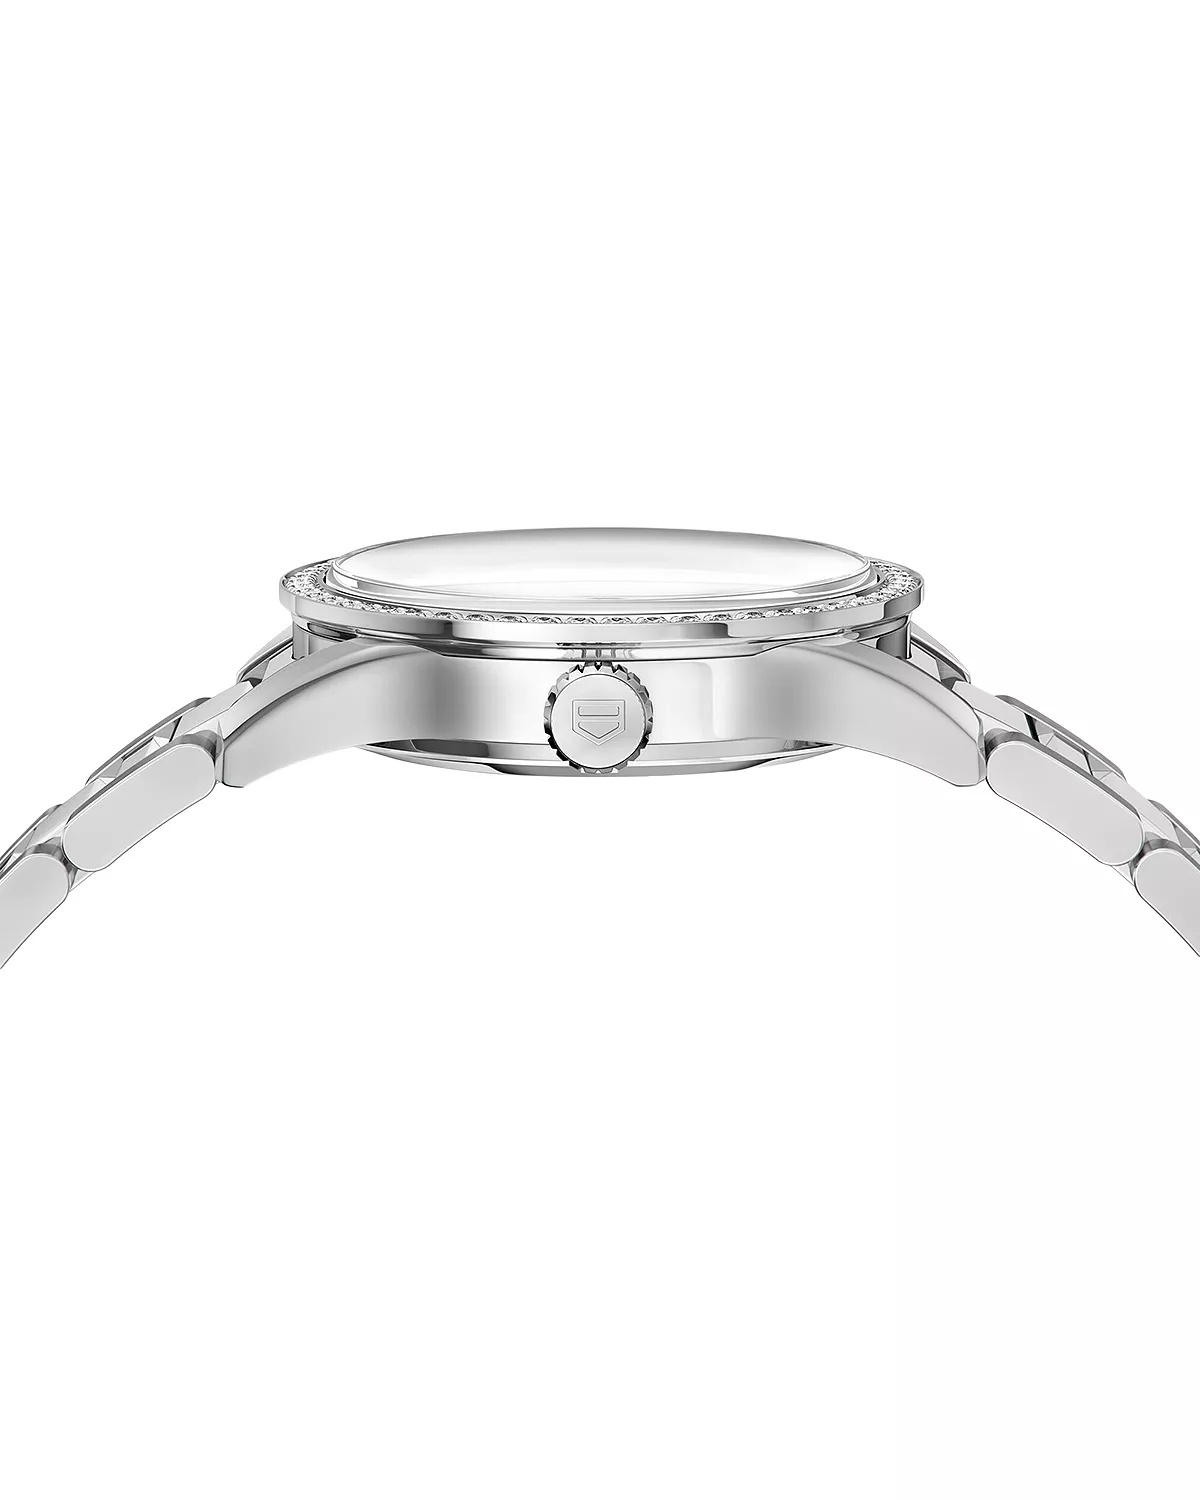 Carrera Stainless Steel and White Mother of Pearl Dial Watch with Diamond Bezel Case, 36mm - 4